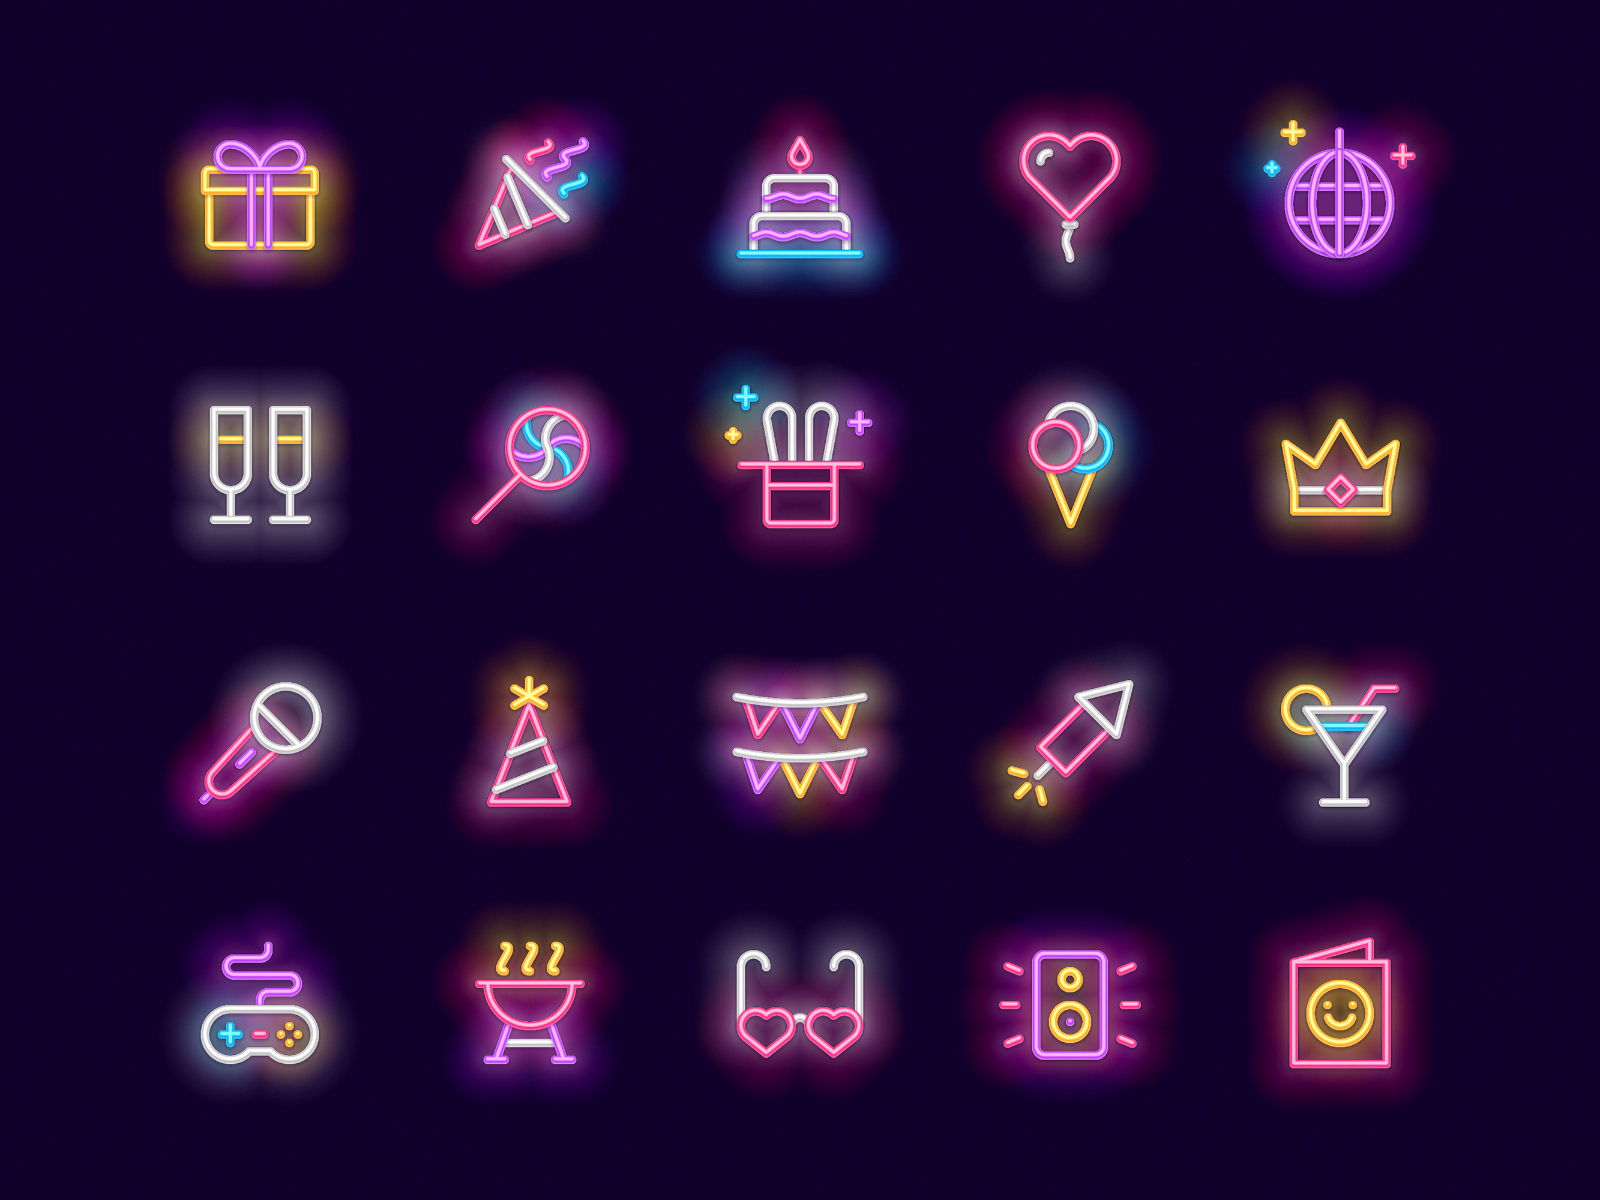 Party neon icons by Andrei Rudenko on Dribbble